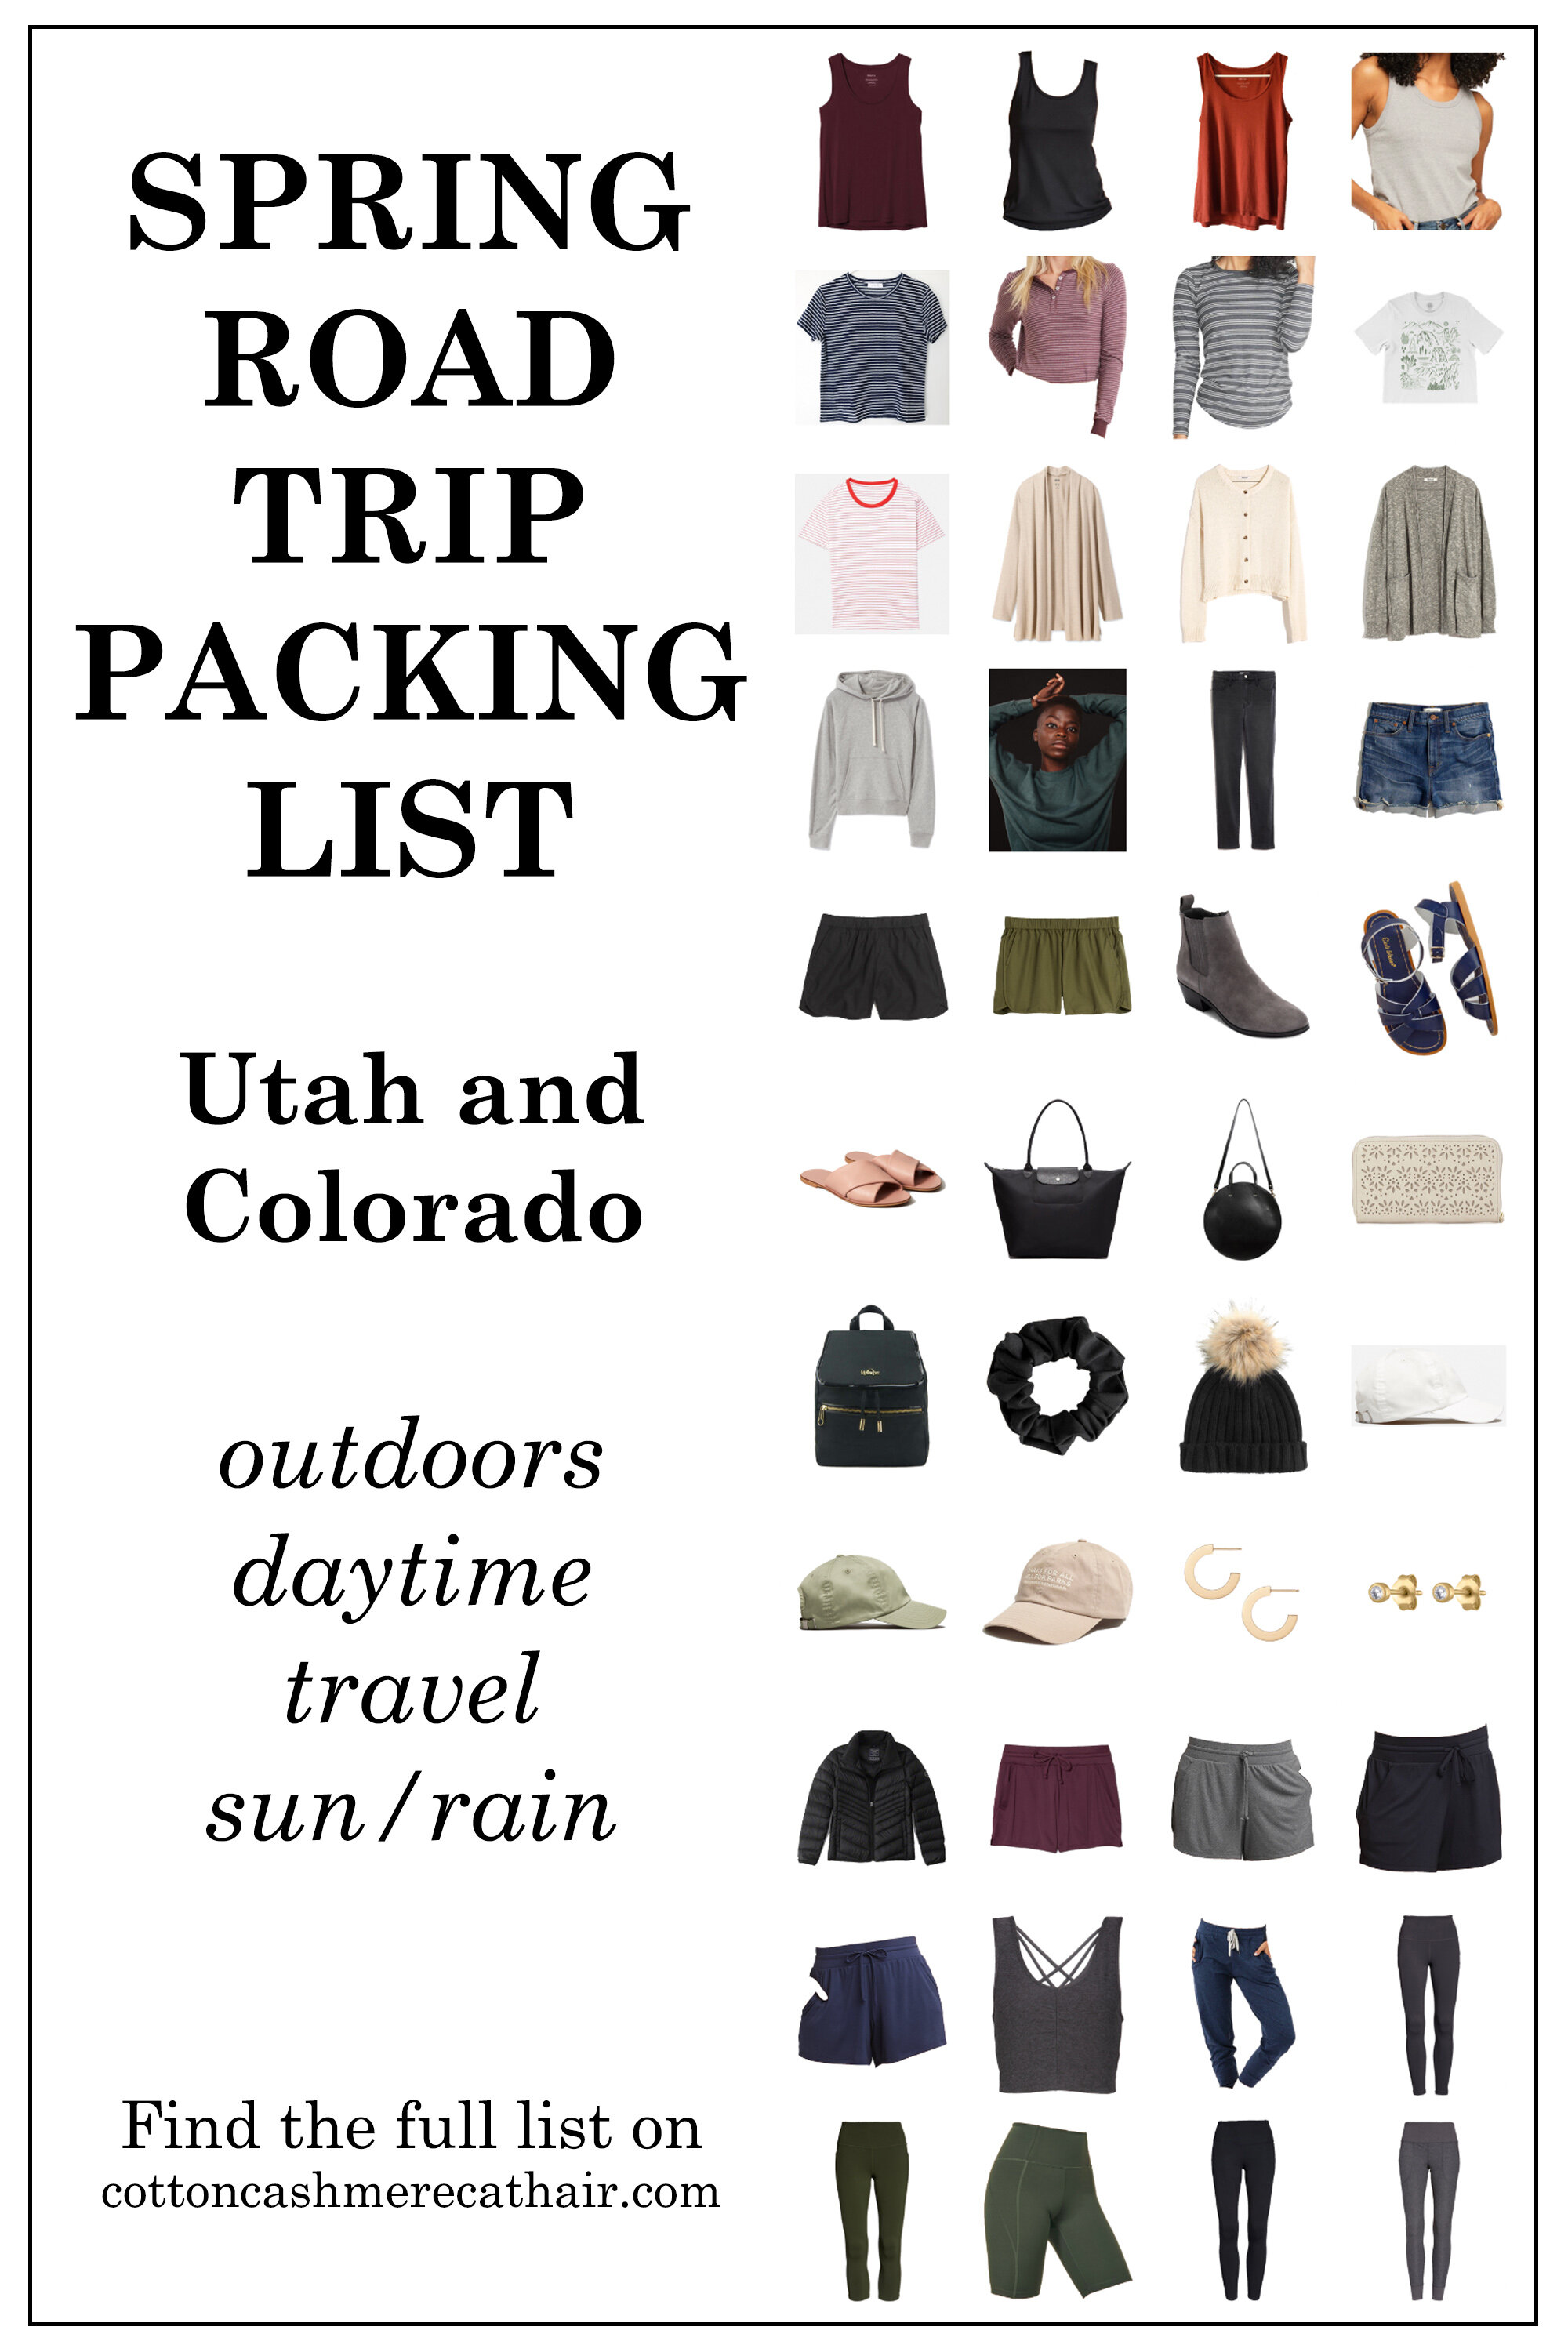 What to Pack for a Long Summer Road Trip